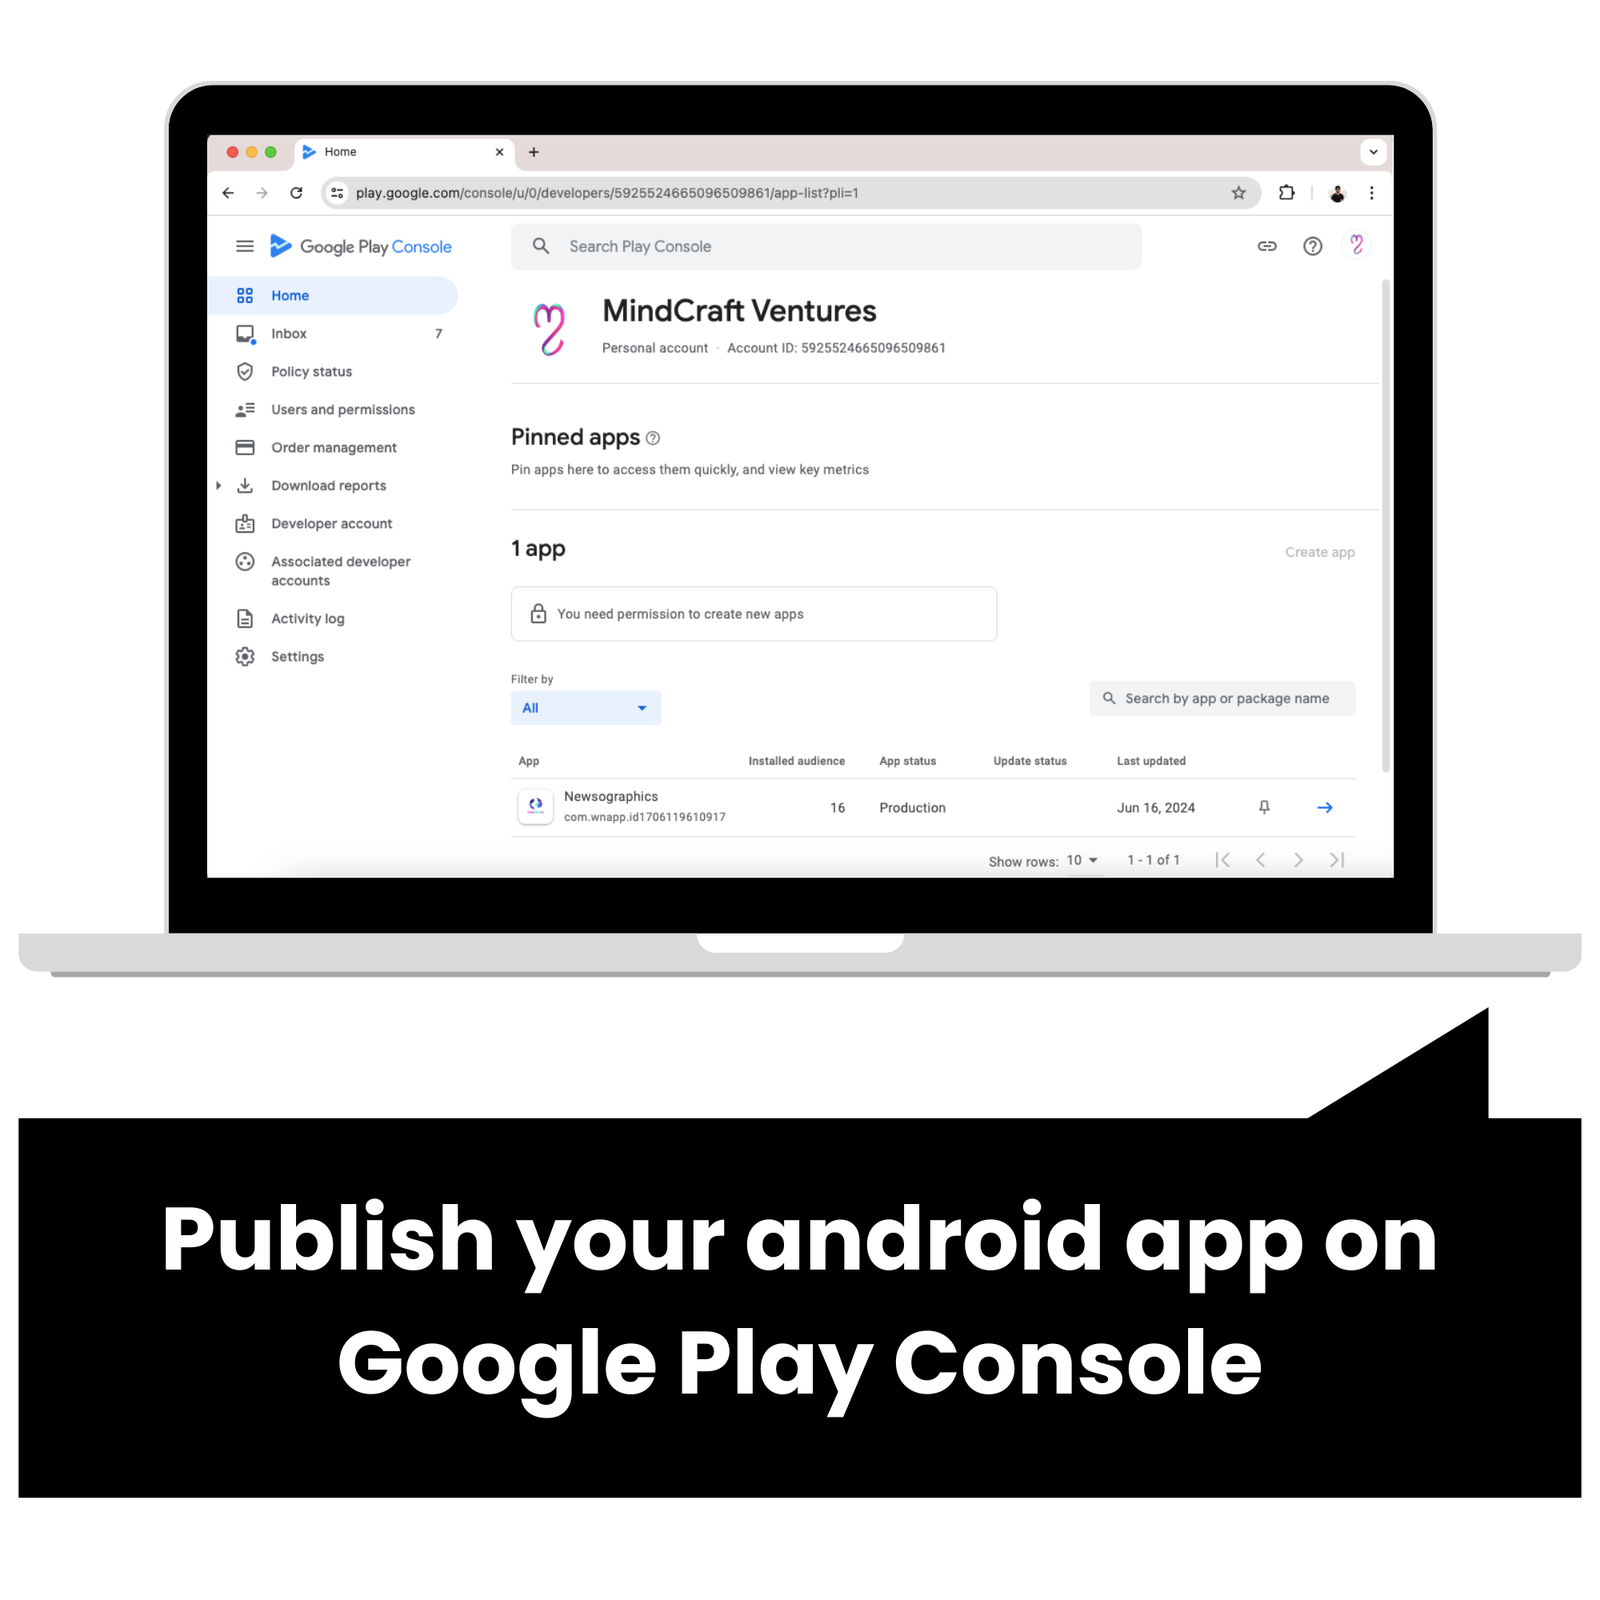 publish your android app on Google Play Console